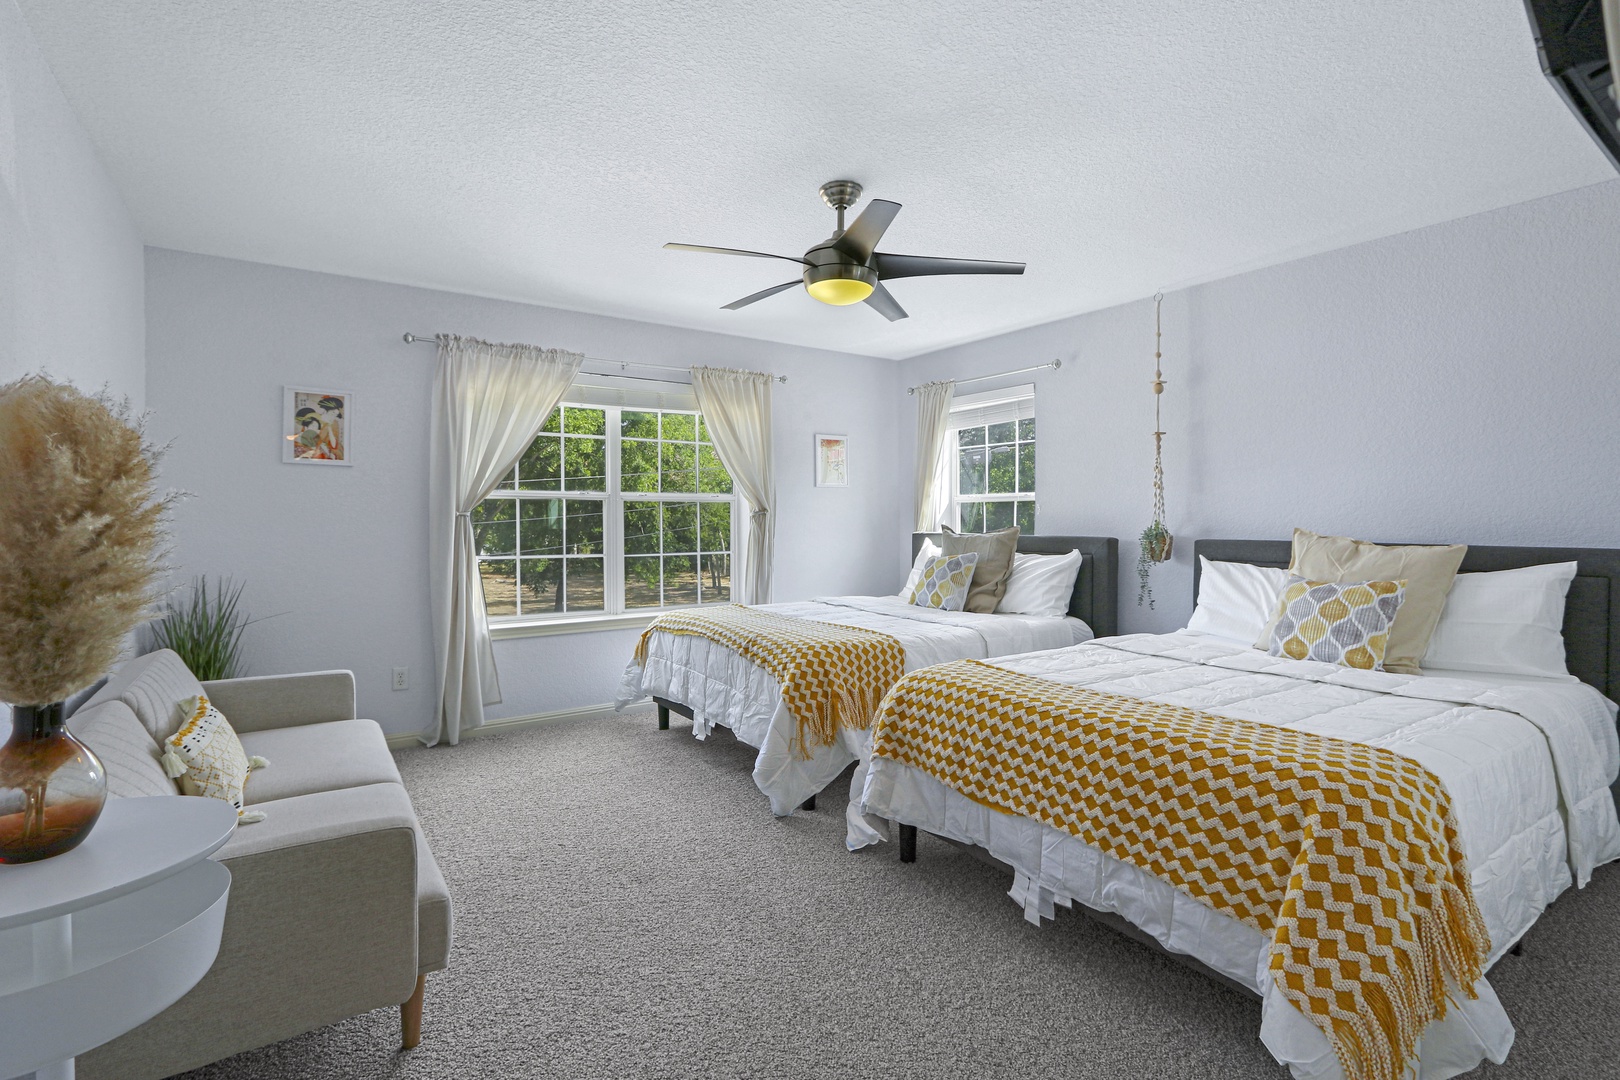 Bedroom 3 offers a pair of queen beds, Smart TV, & an additional cozy sofa